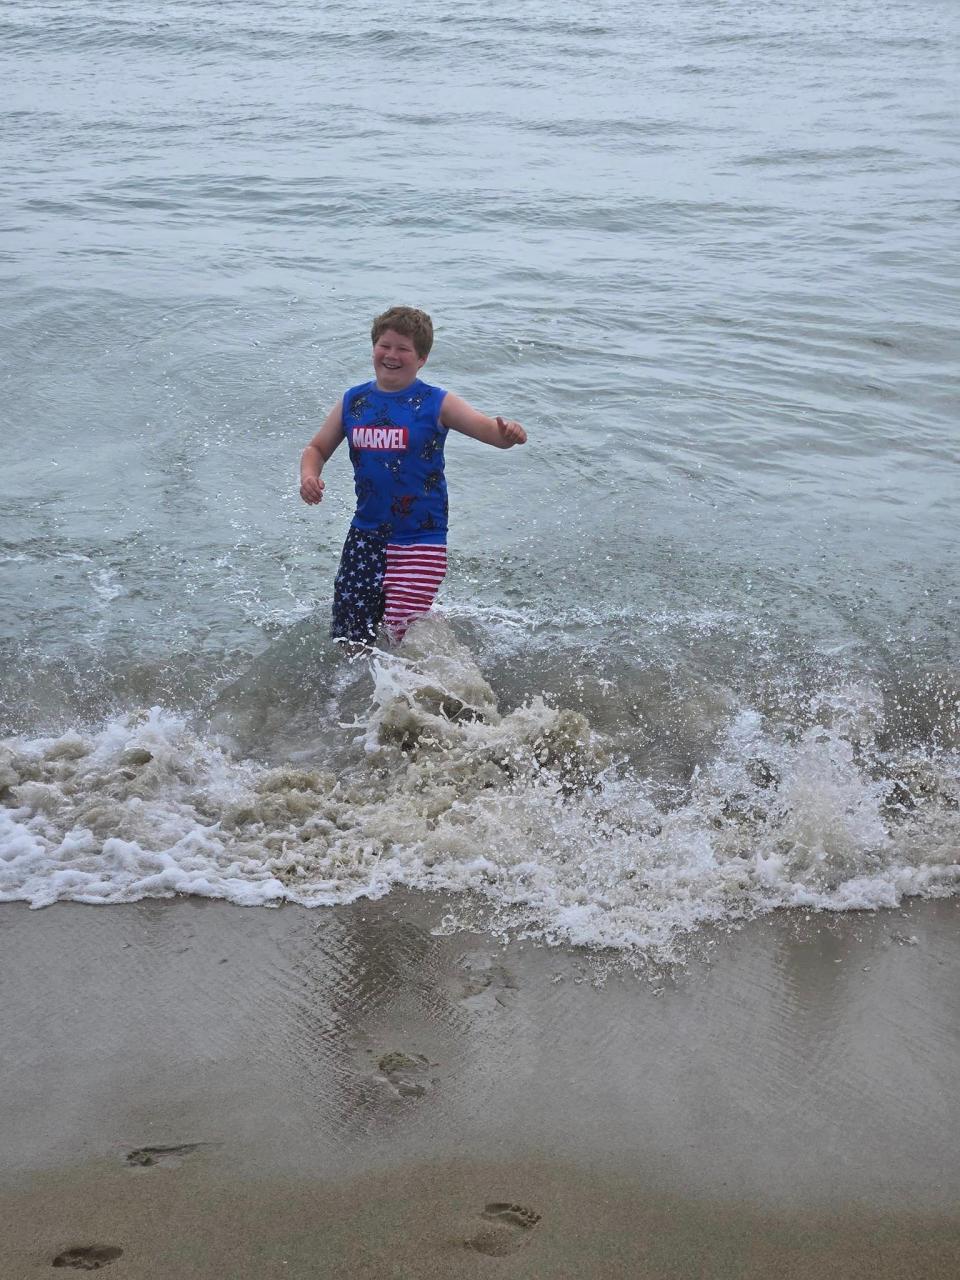 Heather Cassani's 10-year-old son Declan collapsed after spending time in the water at Hampton Beach July 4 with what Cassani was told by first responders were symptoms of hypothermia.